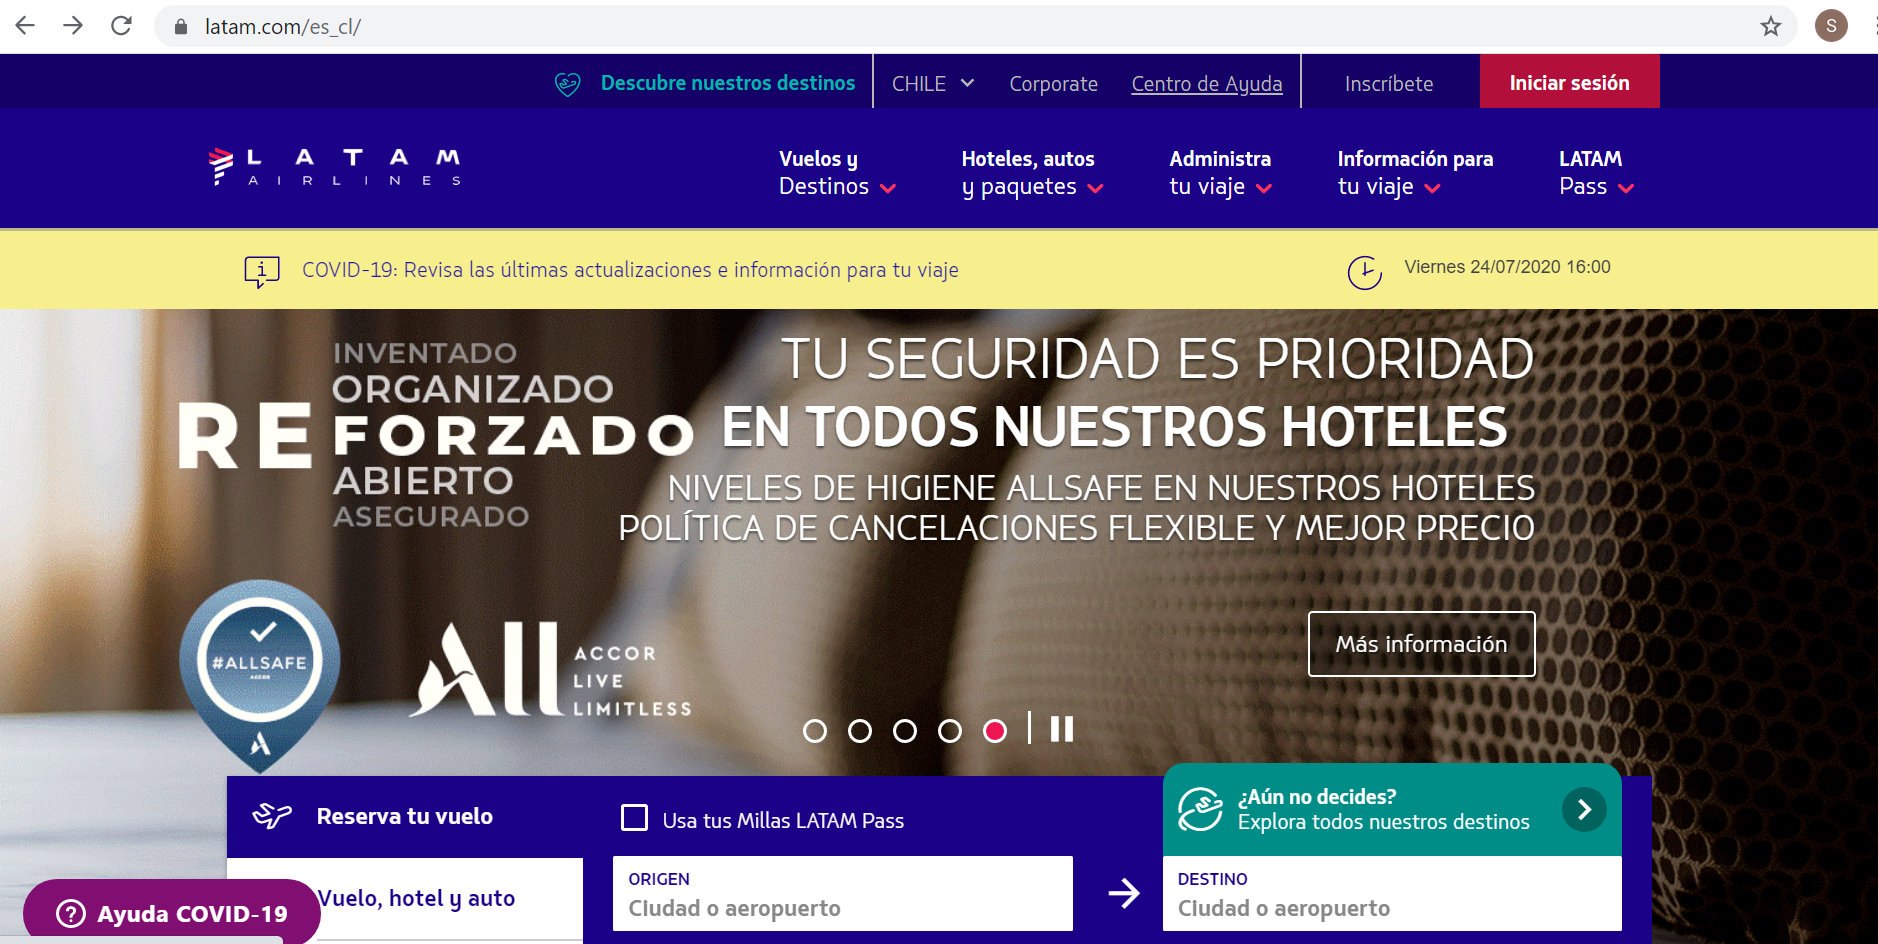 Accor CL Home Page Screenshot.PNG